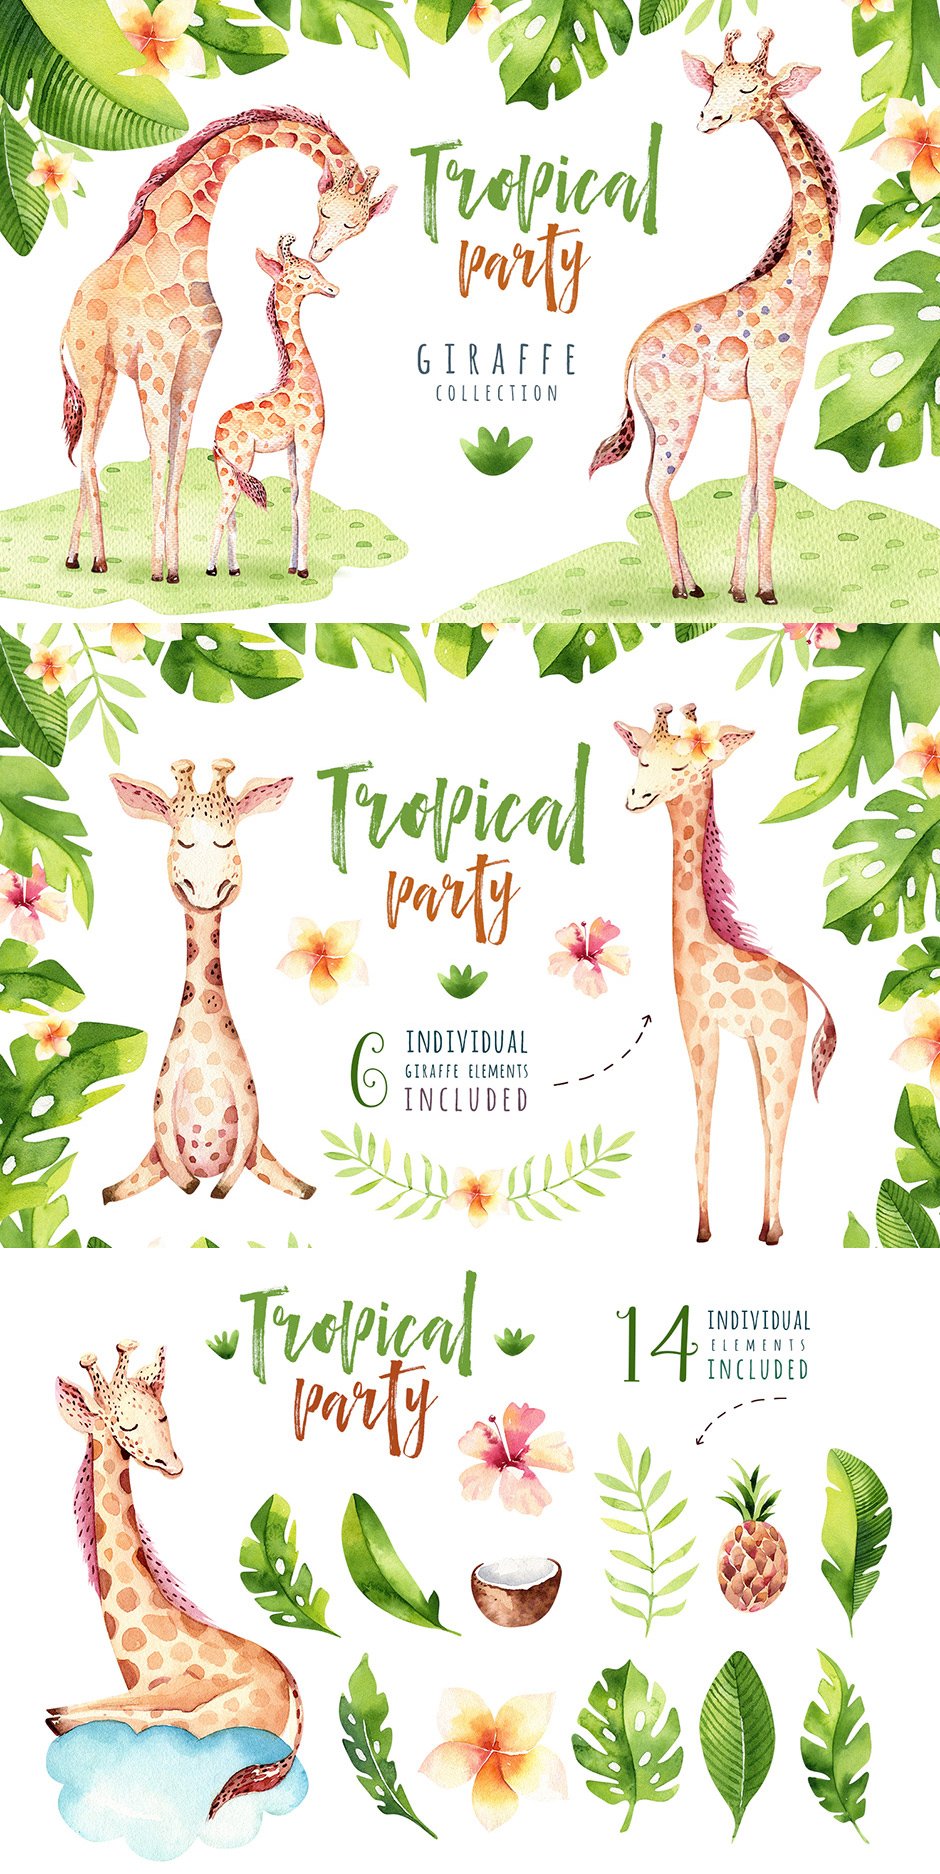 Giraffe Collection Tropical Illustrations Party